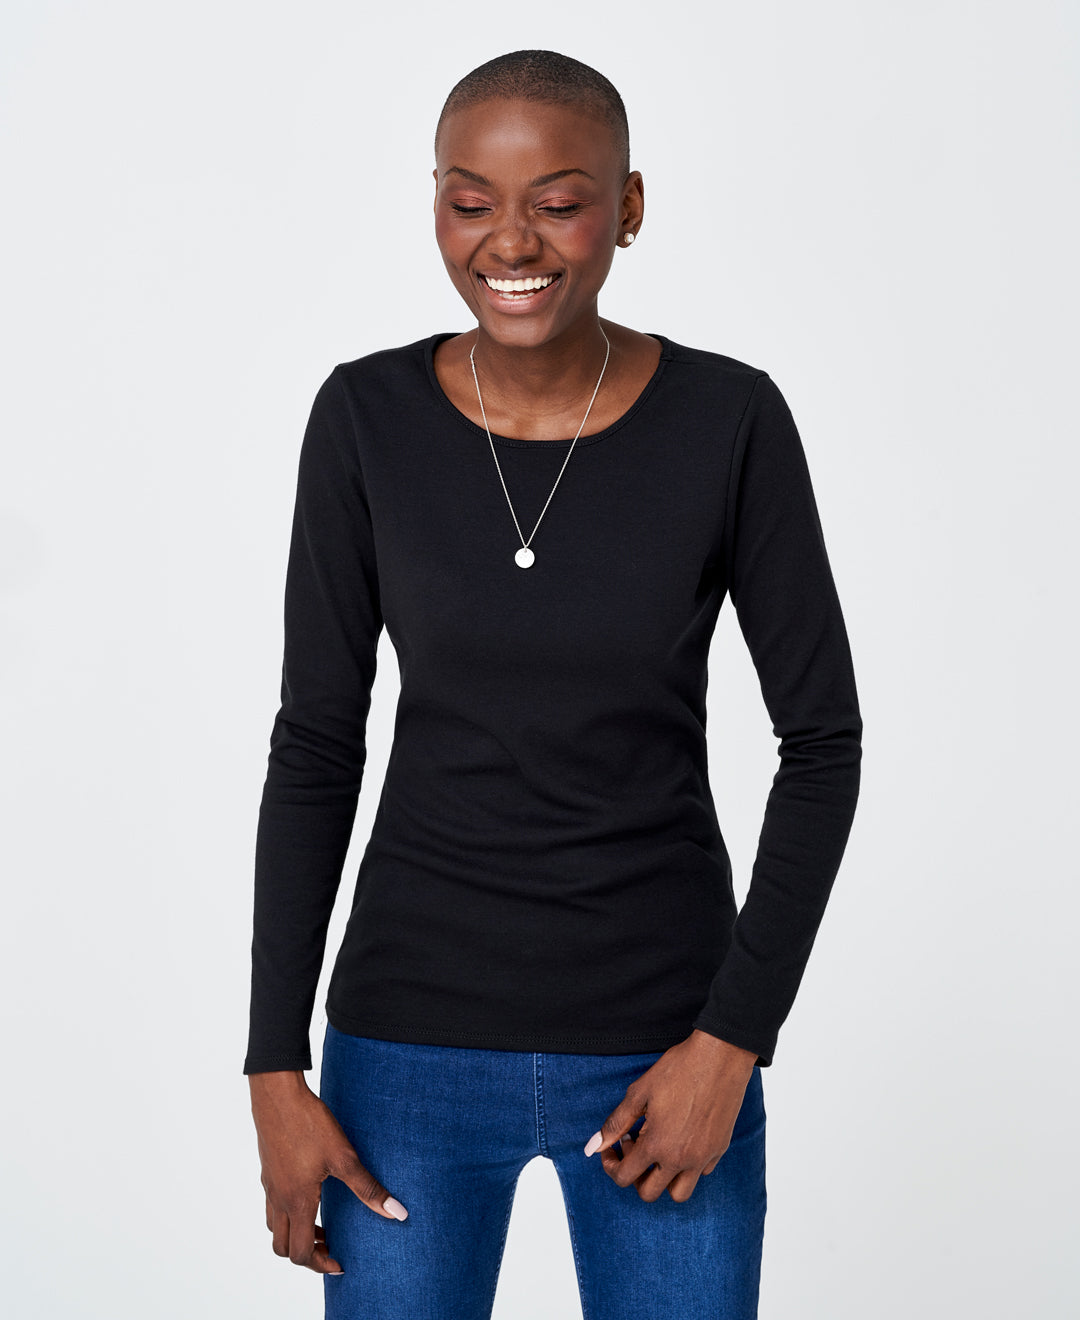 Organic cotton transformable 3-way top - Ethically made in Canada